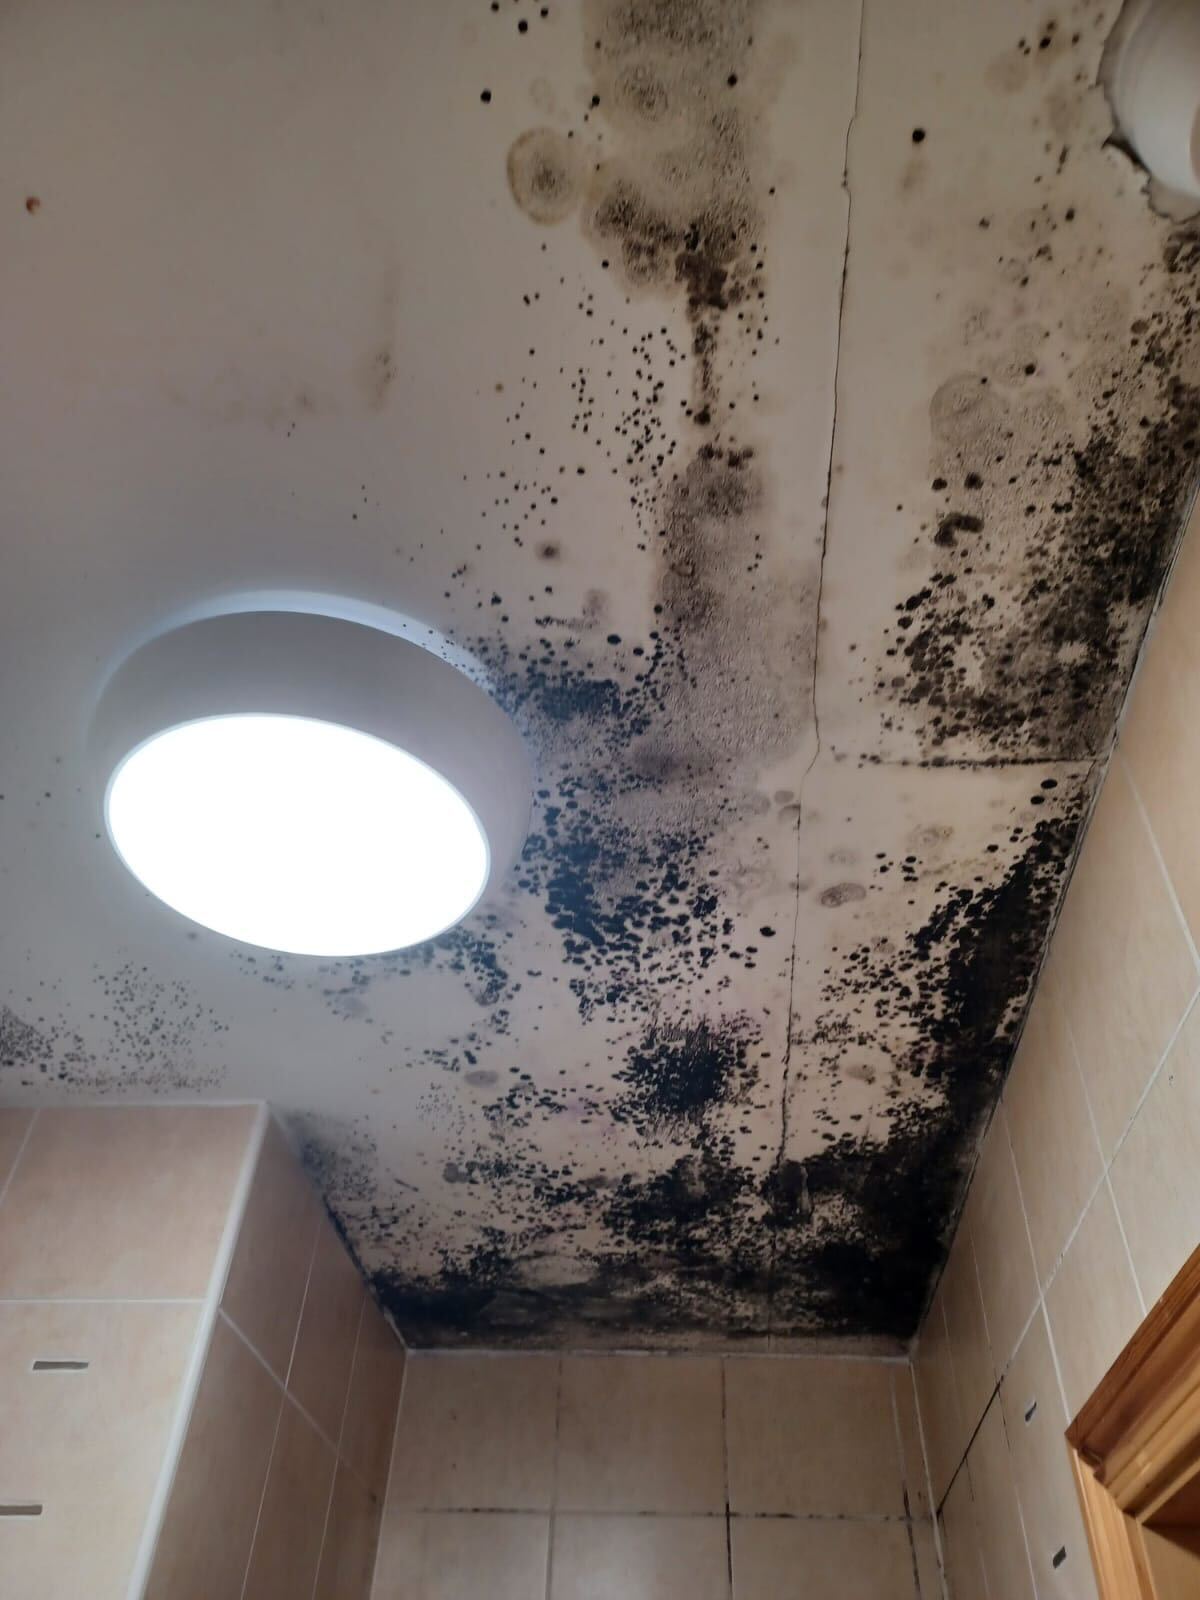 Mould Cleaning Service in Cork